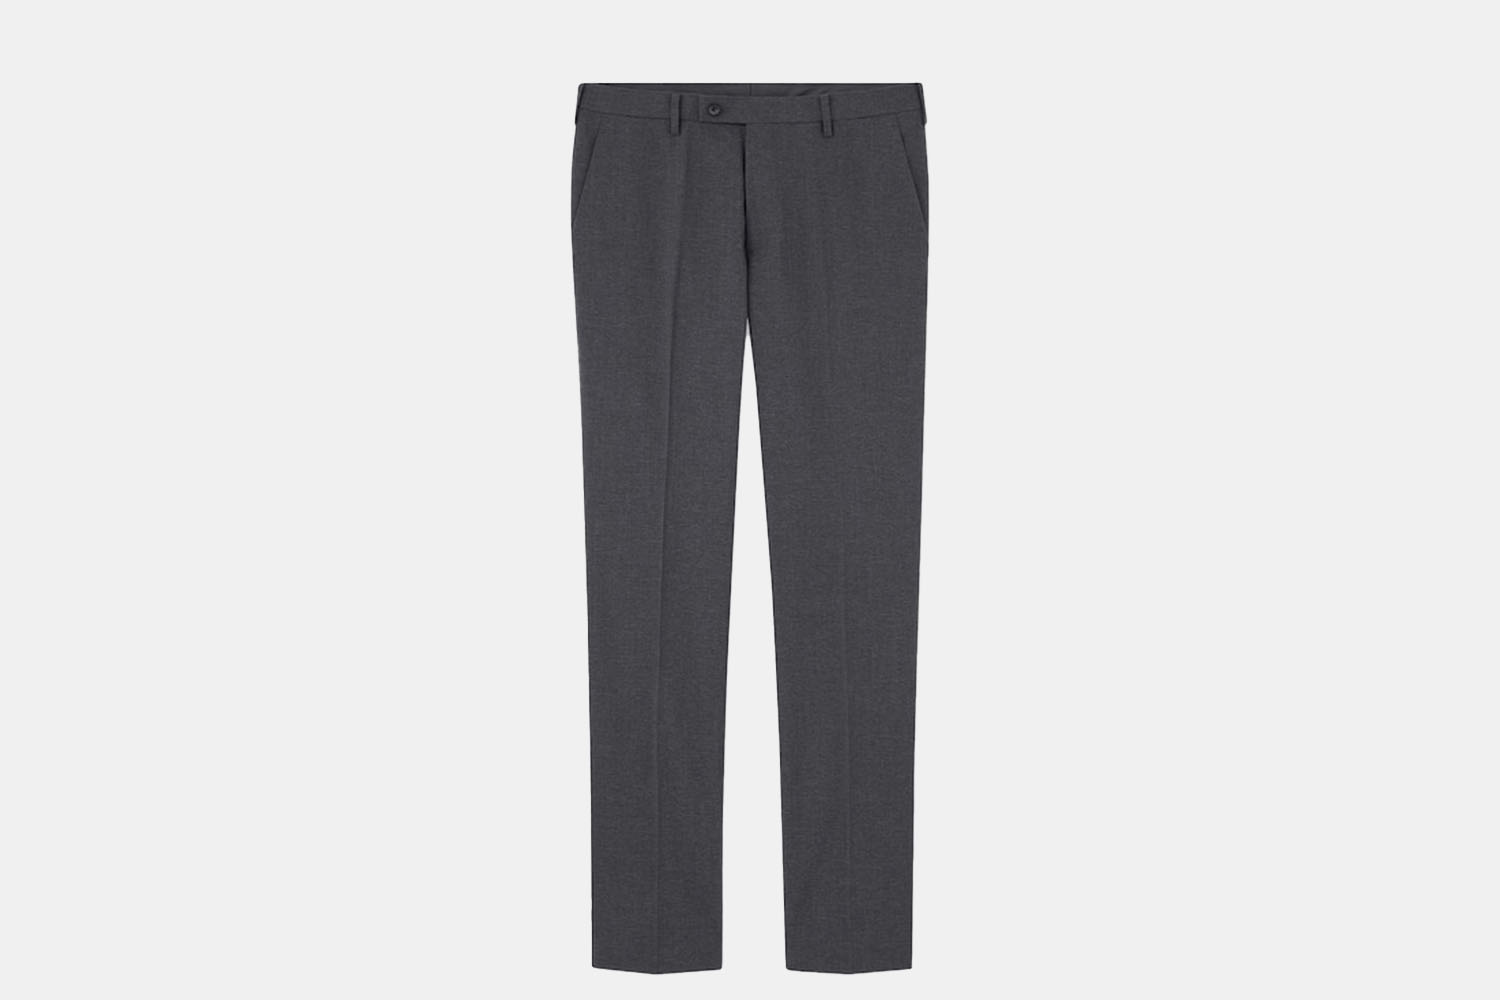 The 20 Best Pairs of Pants for an Effortlessly Stylish Return to the Office